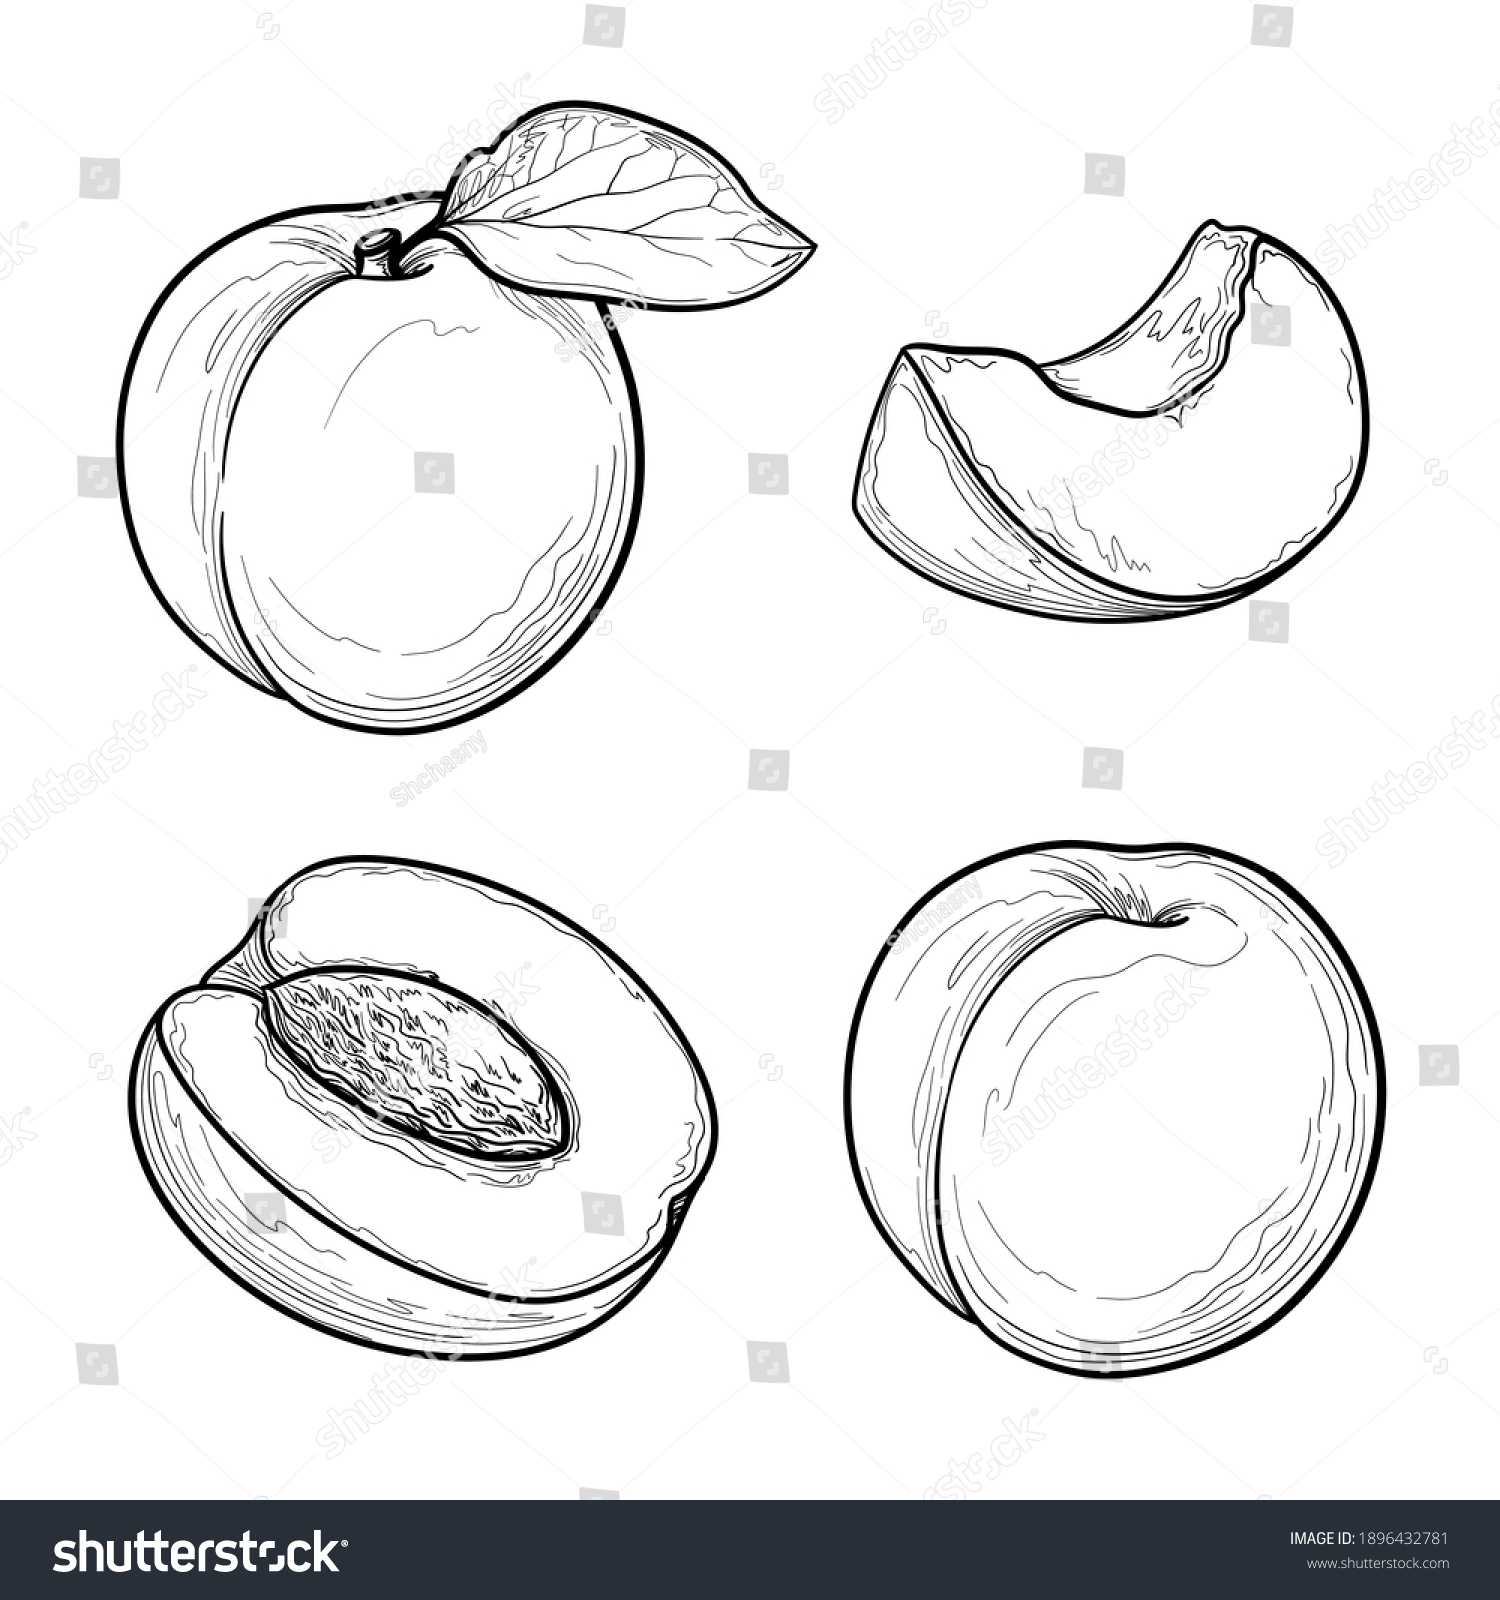 Apricot vector drawing set. Fruits drawings isolated on a white background. #1896432781